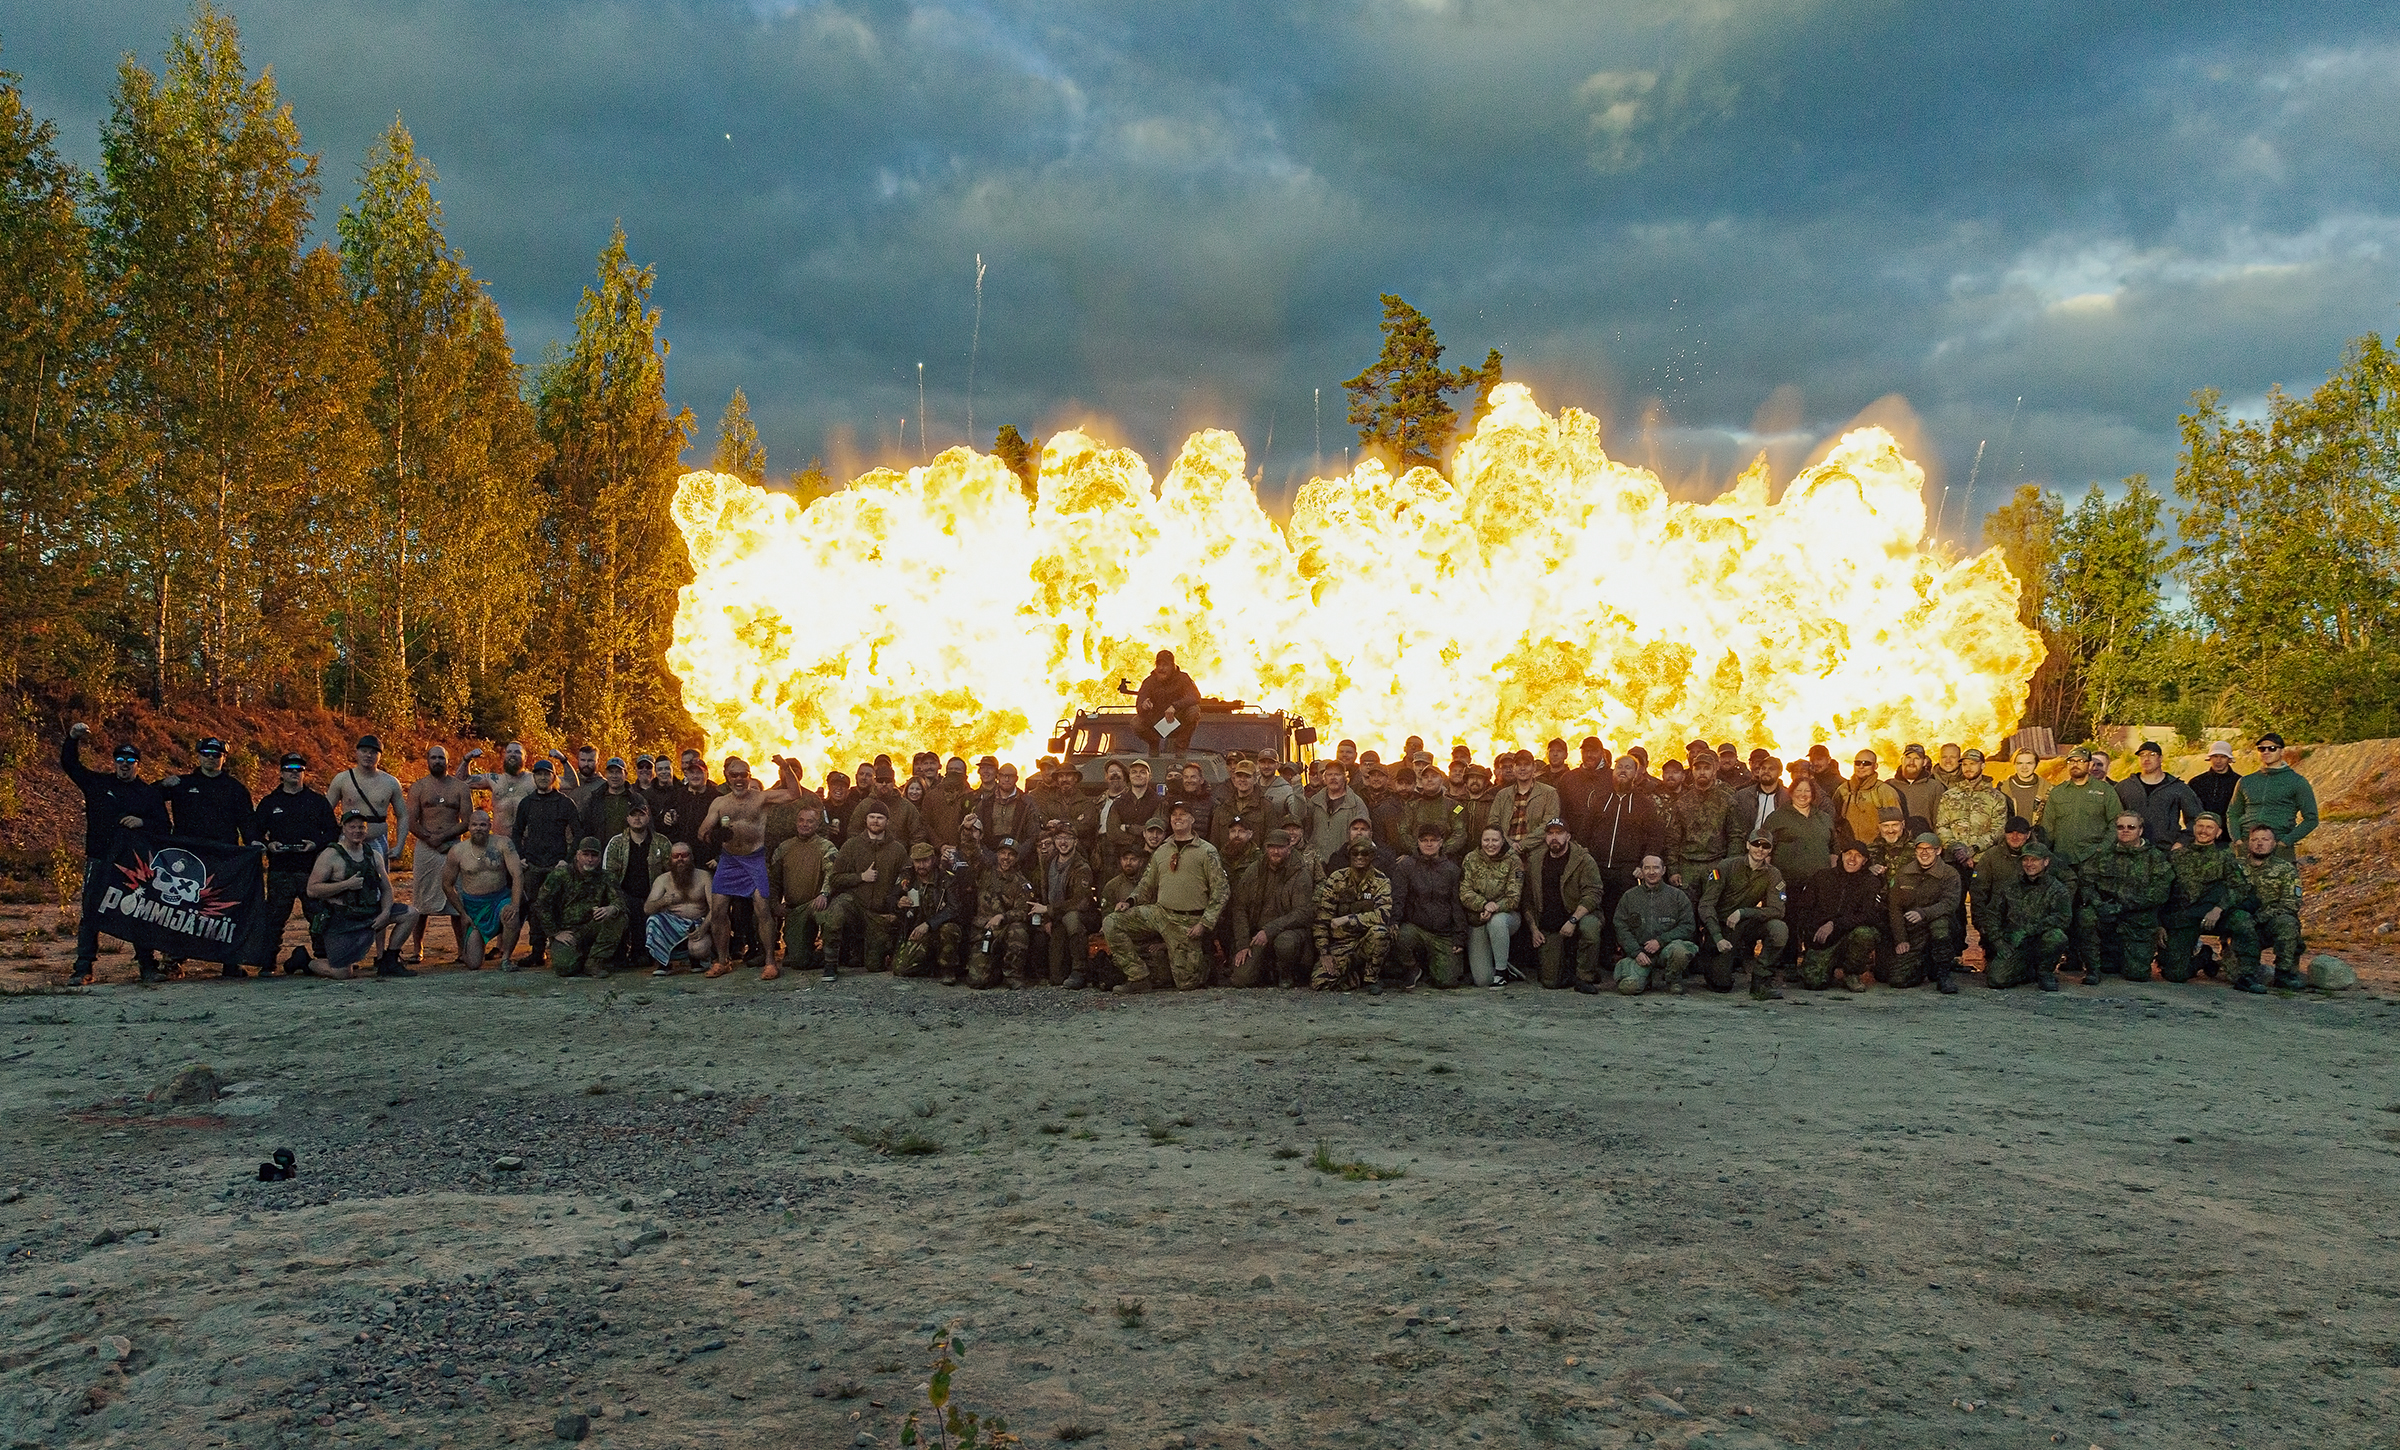 Participants in a row in front of a sea of flames.